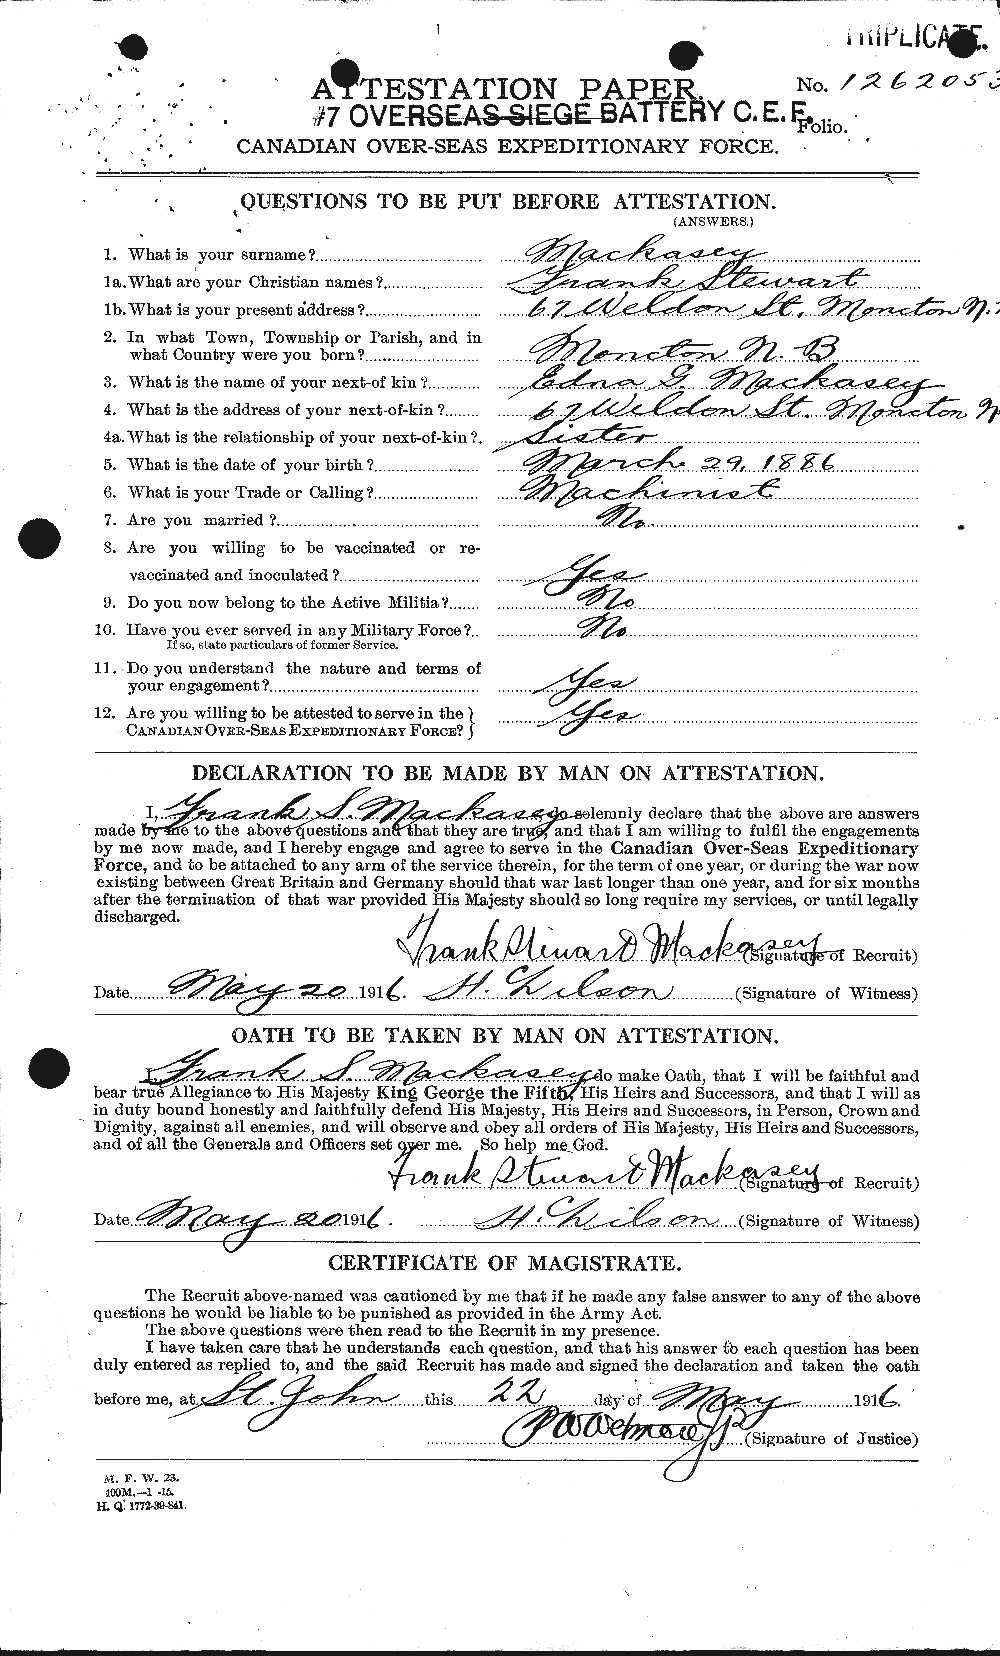 Personnel Records of the First World War - CEF 530870a